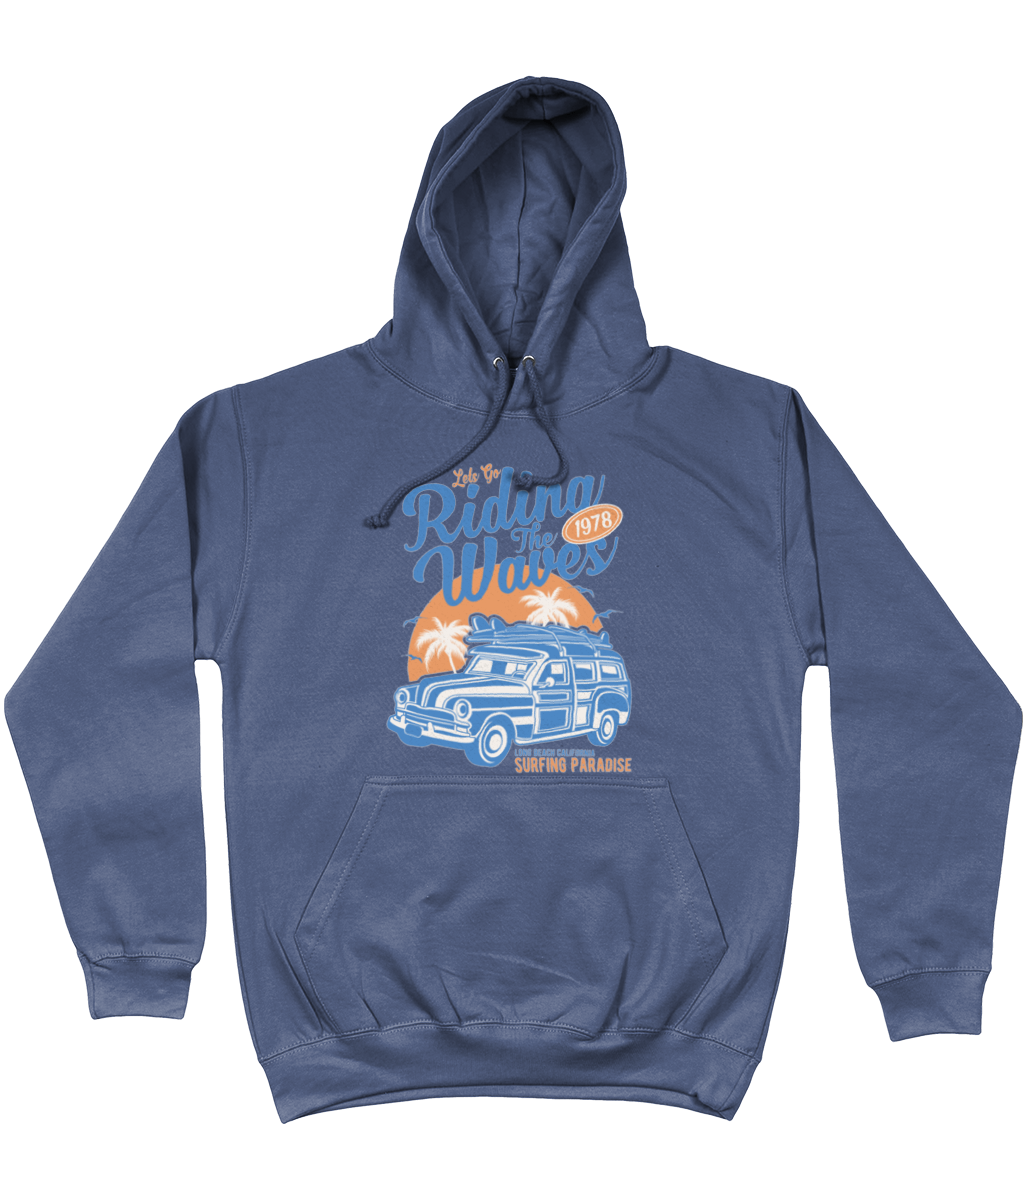 Riding The Waves – Awdis College Hoodie